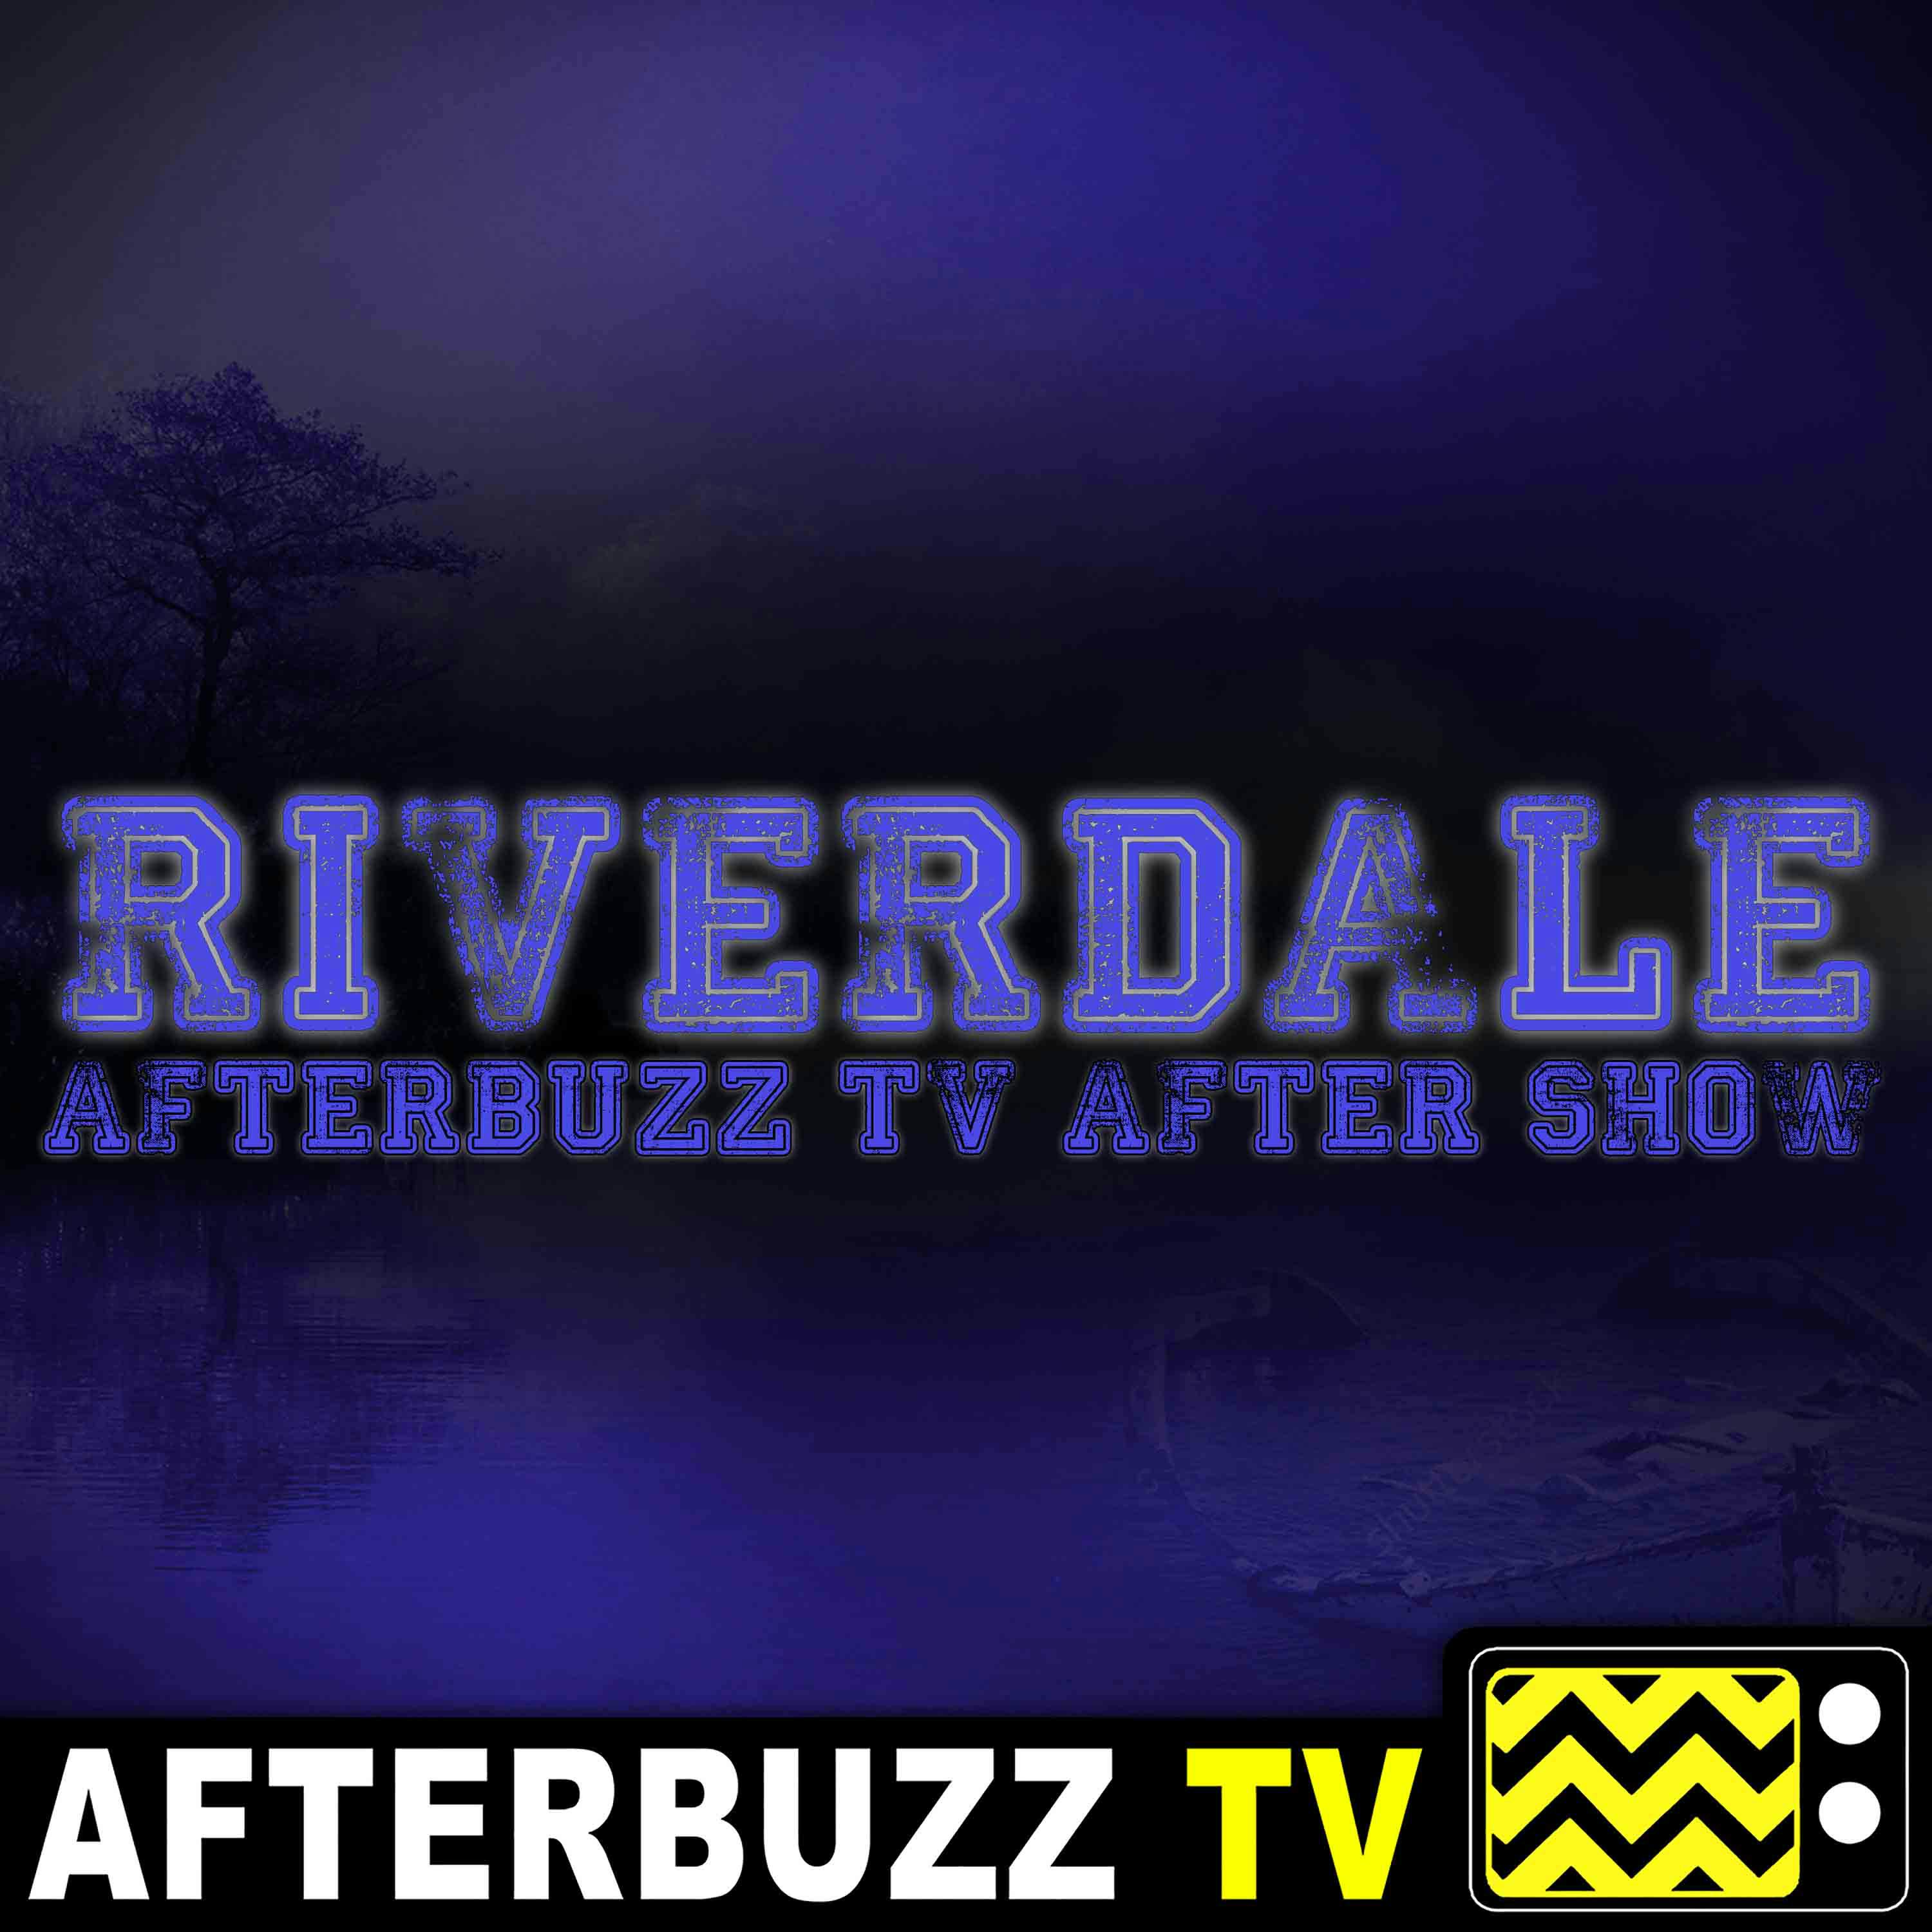 Riverdale S4 E17 Recap & After Show: Kevin and the Angry Inch